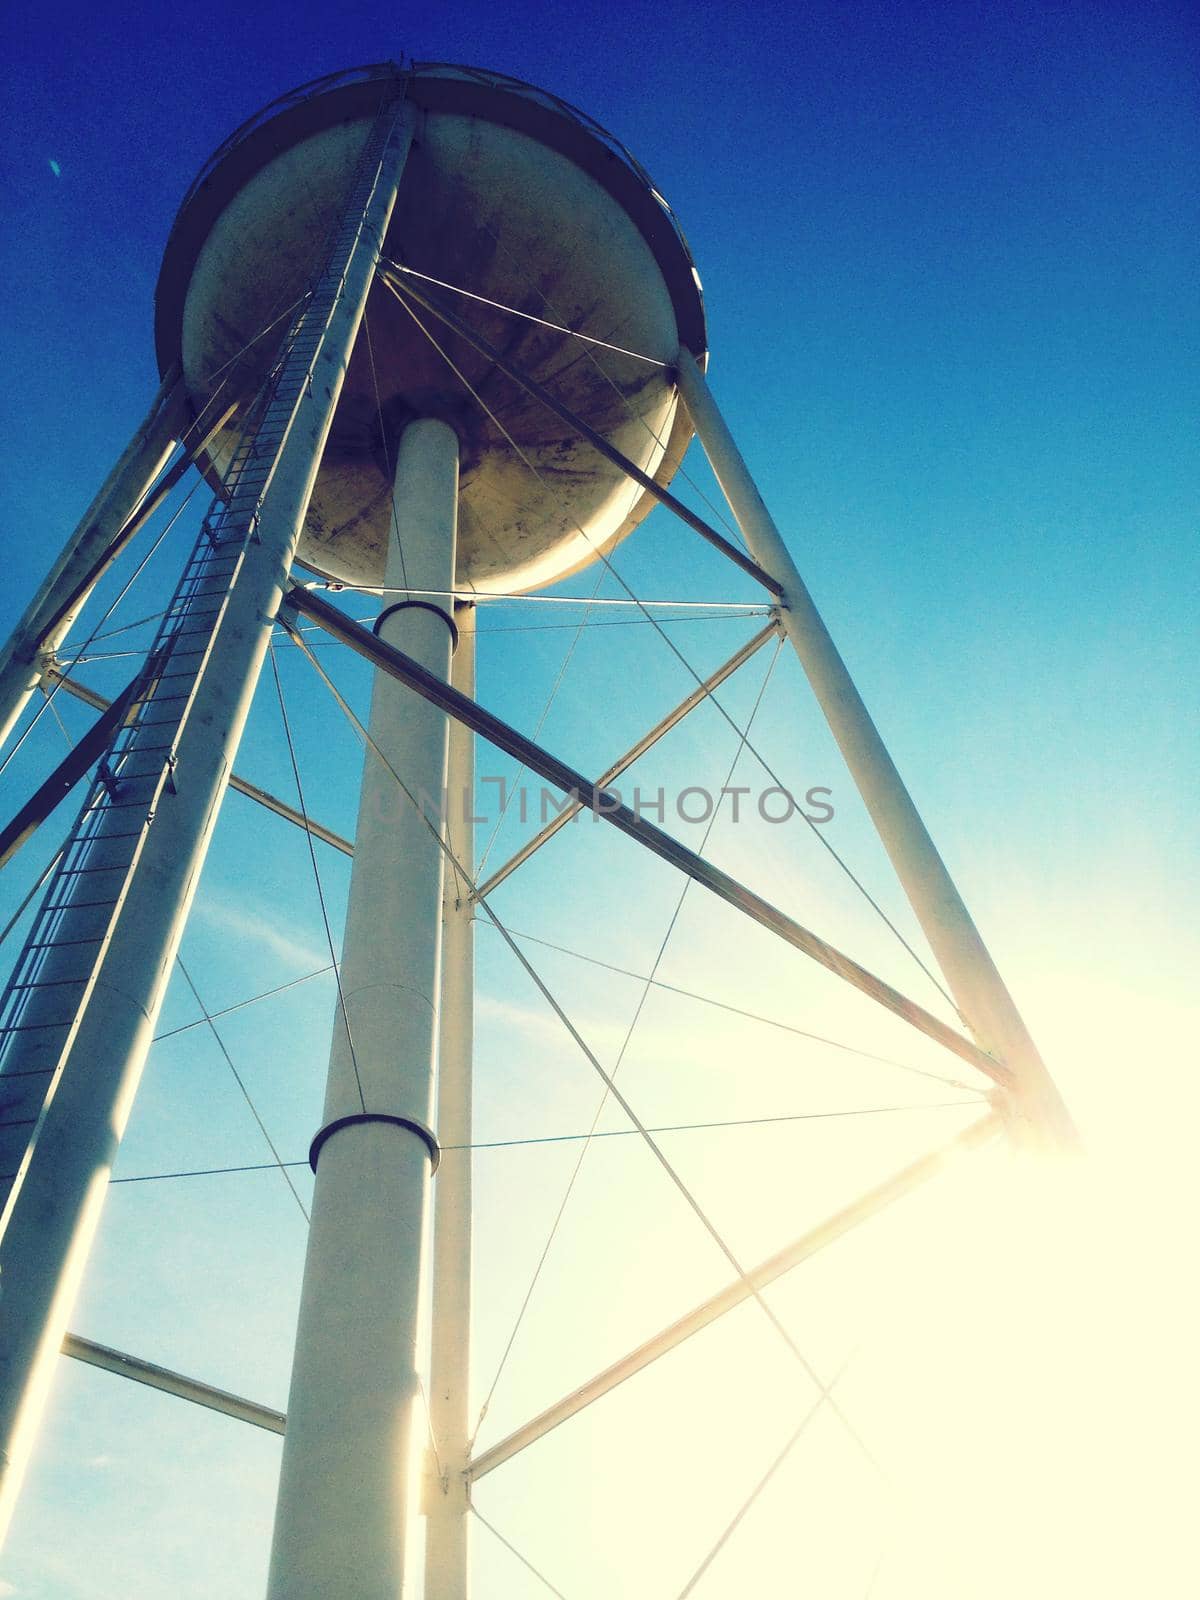 Image of Worm's eye view of a water tower against a blue sky